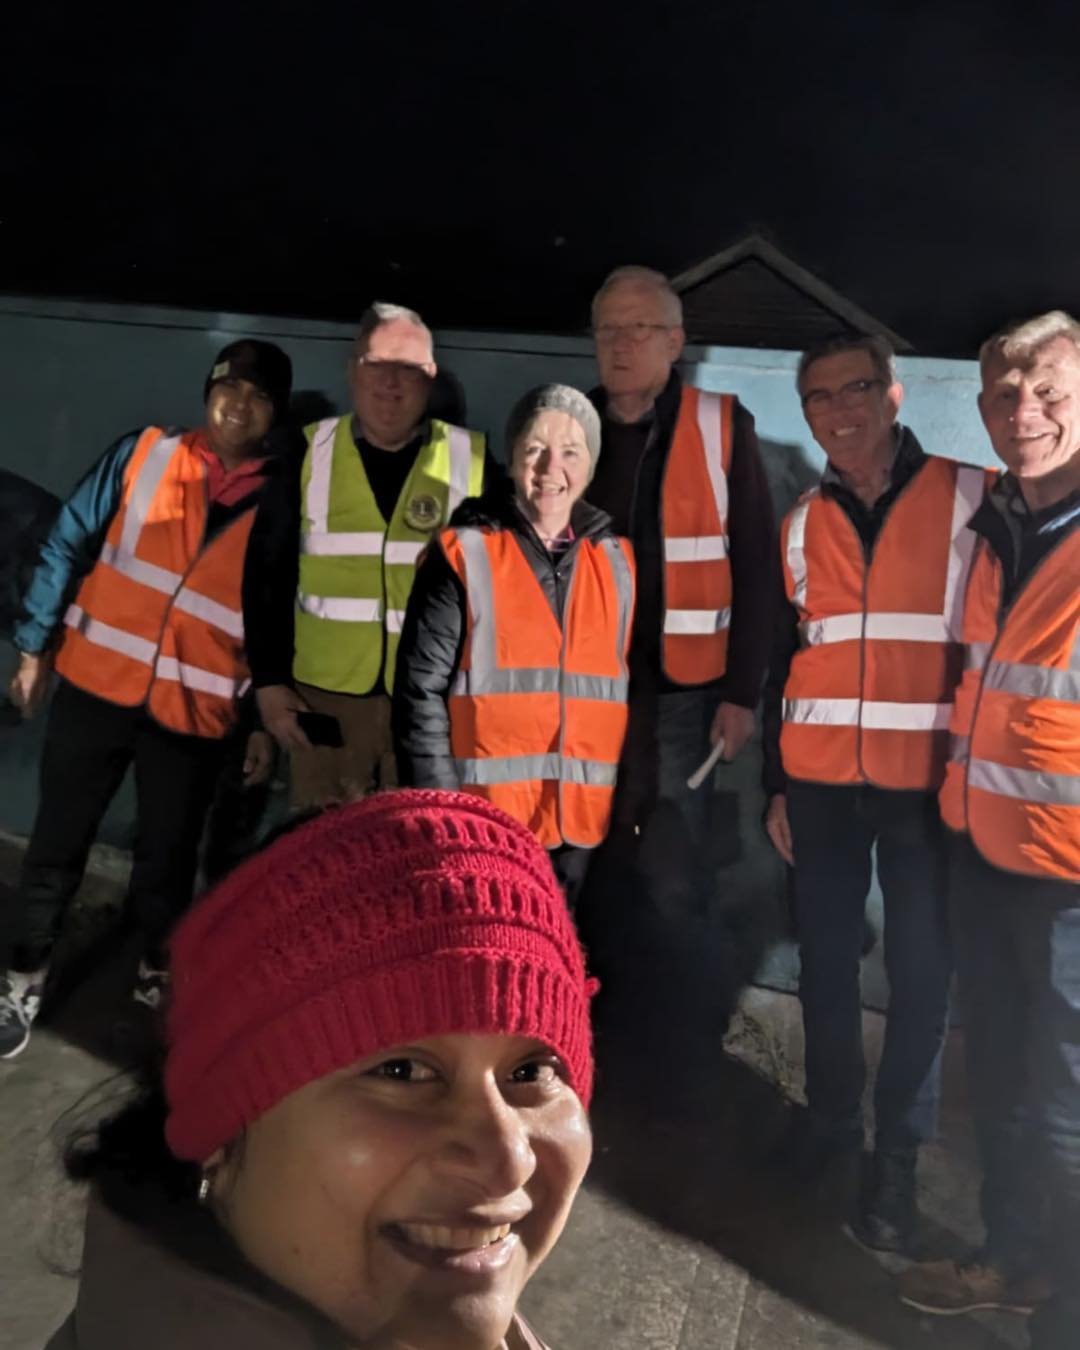 A magical morning at the first official Darkness into Light Greystones. Sugarloaf Lions were happy and proud to assist with the walk. Huge congratulations to the team involved and everyone who walked. What a morning! #darknessintolight #greystones #s